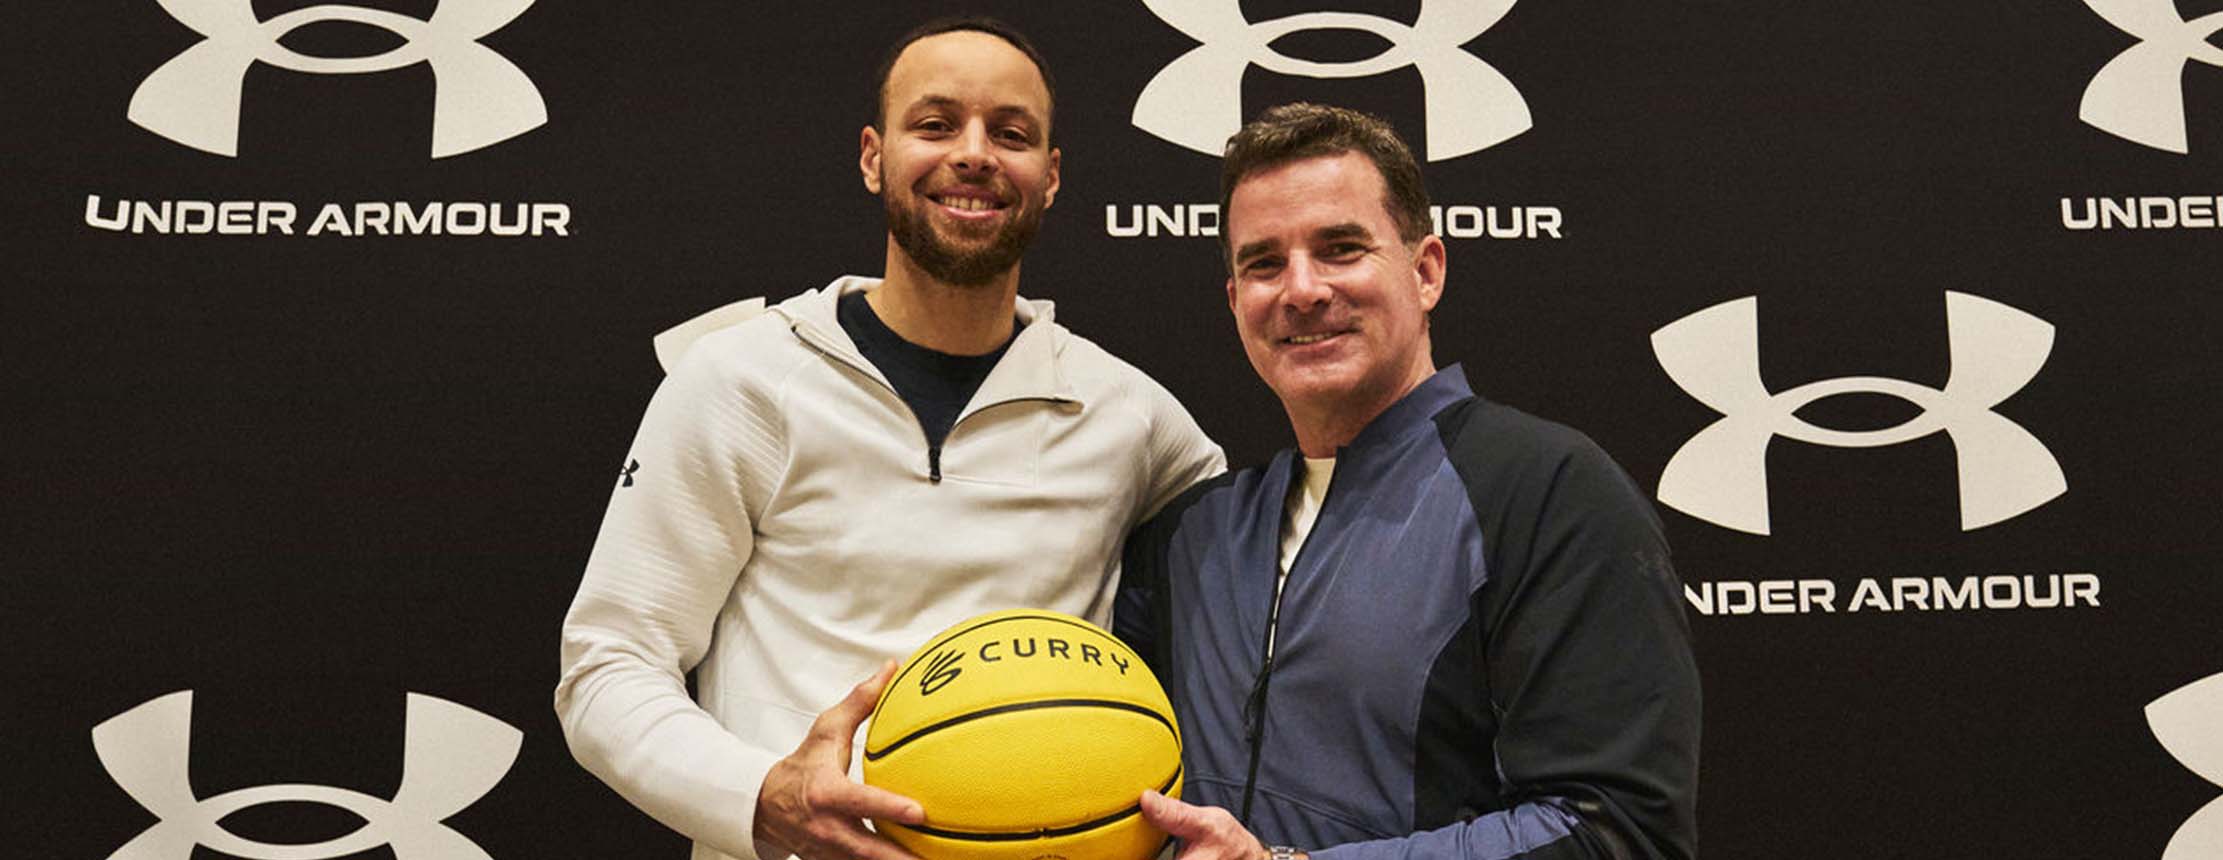 Stephen curry and kevin plank